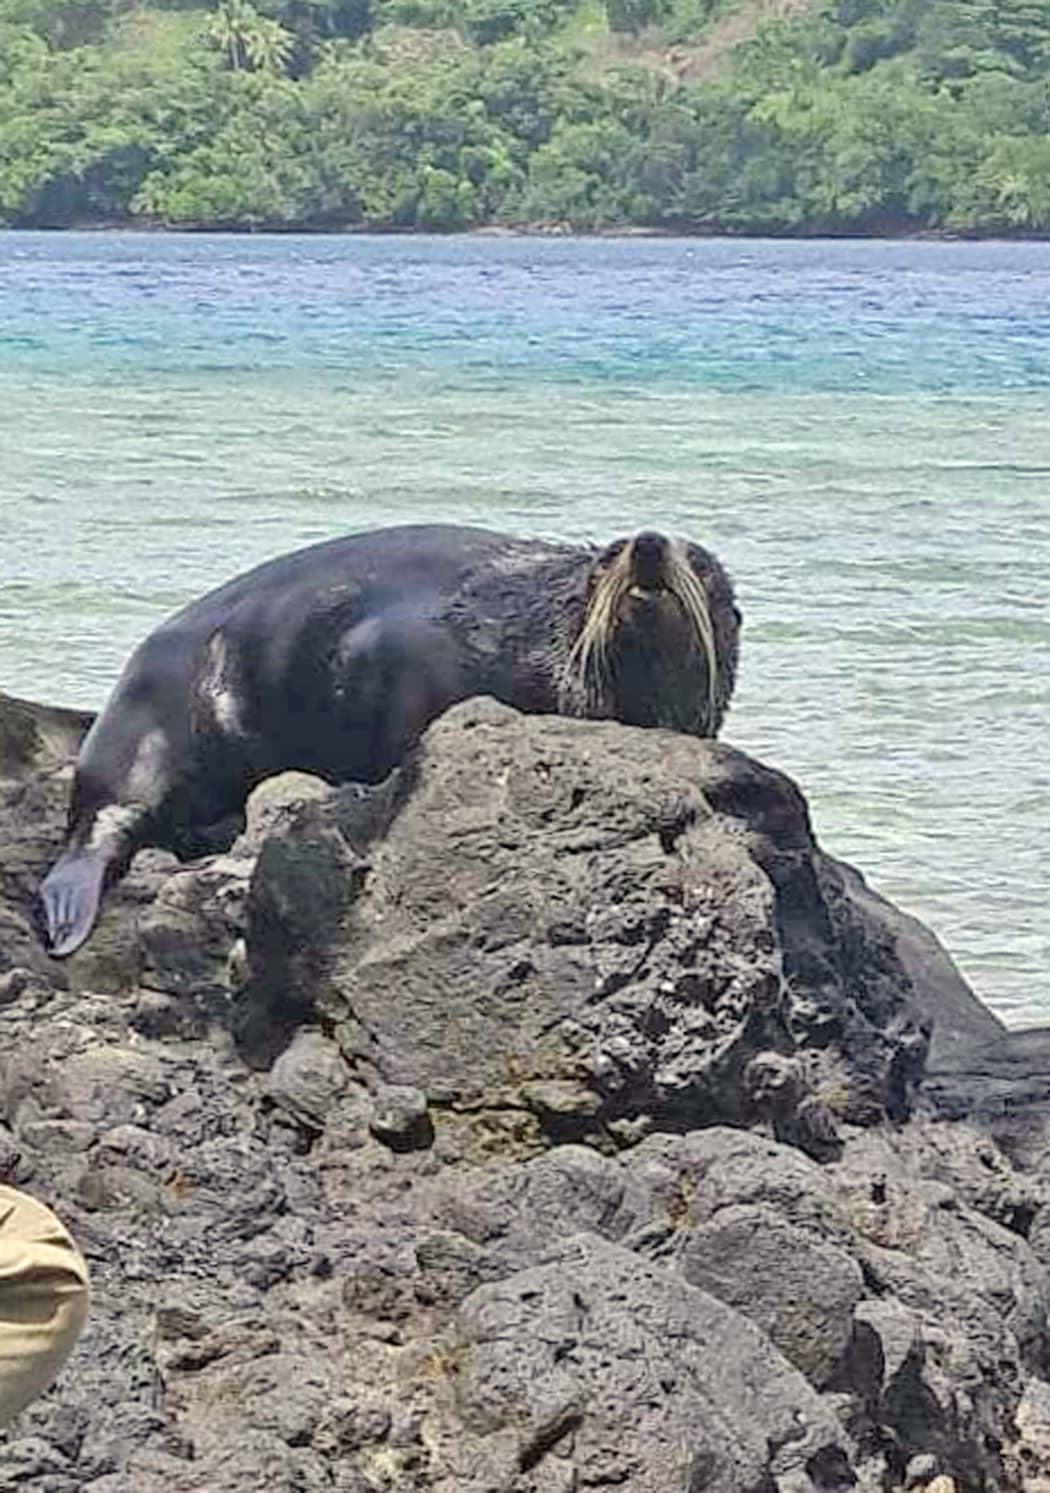 A mystery seal found on the rocks at Rukua Village in Beqa, Fiji.